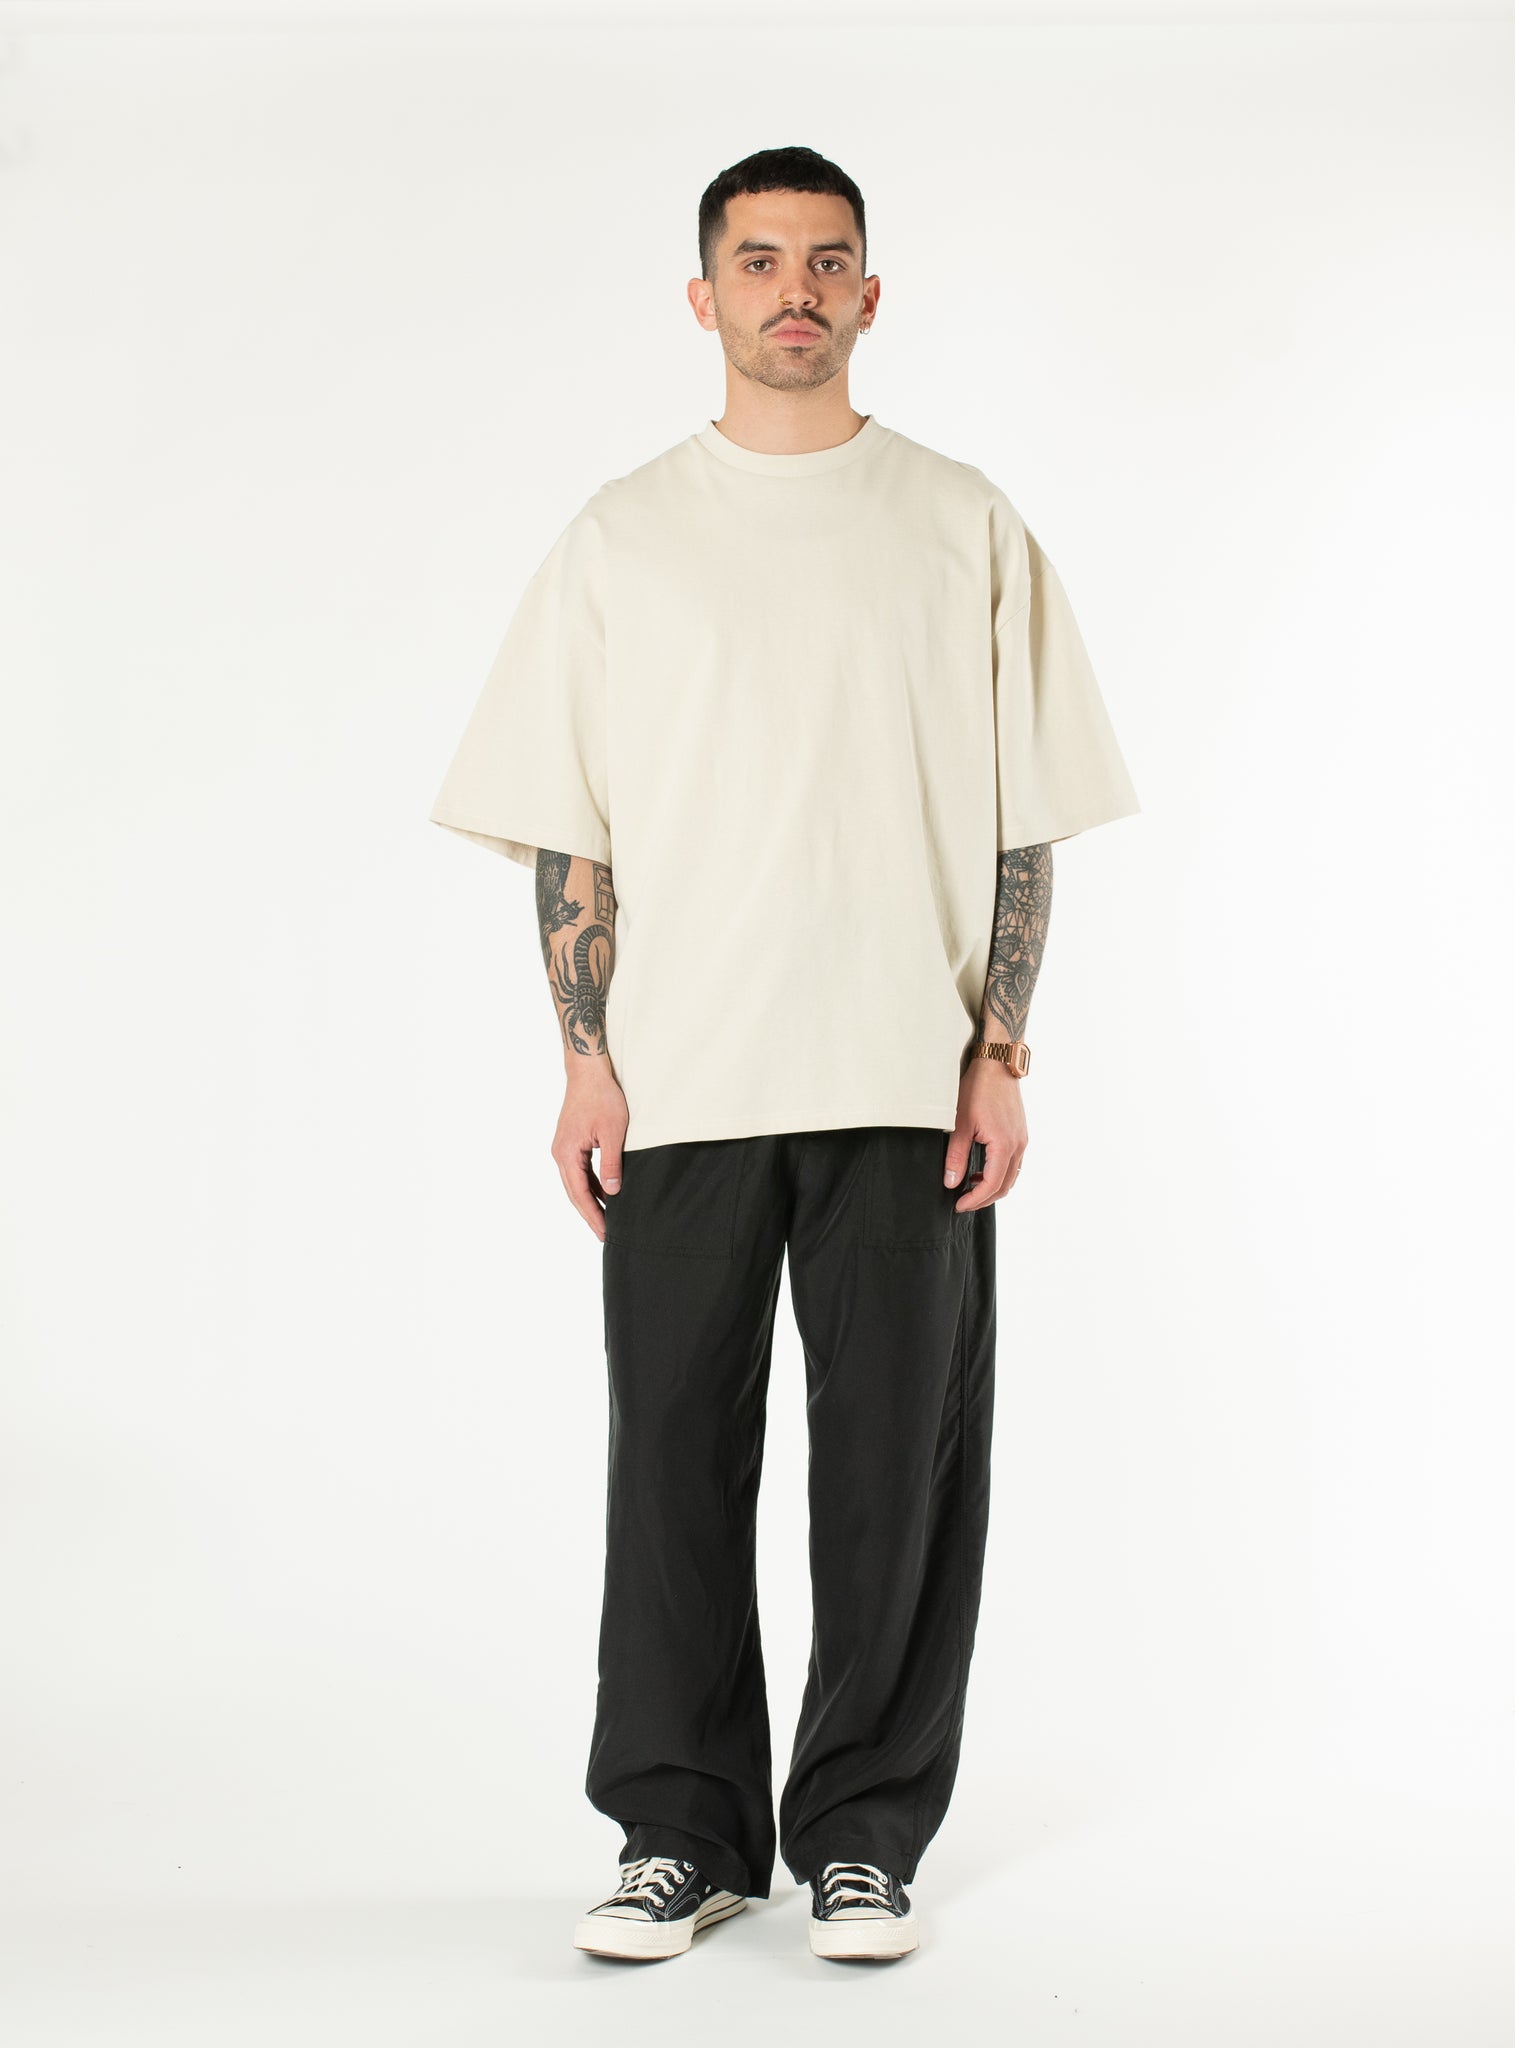 Easy Wind Trousers